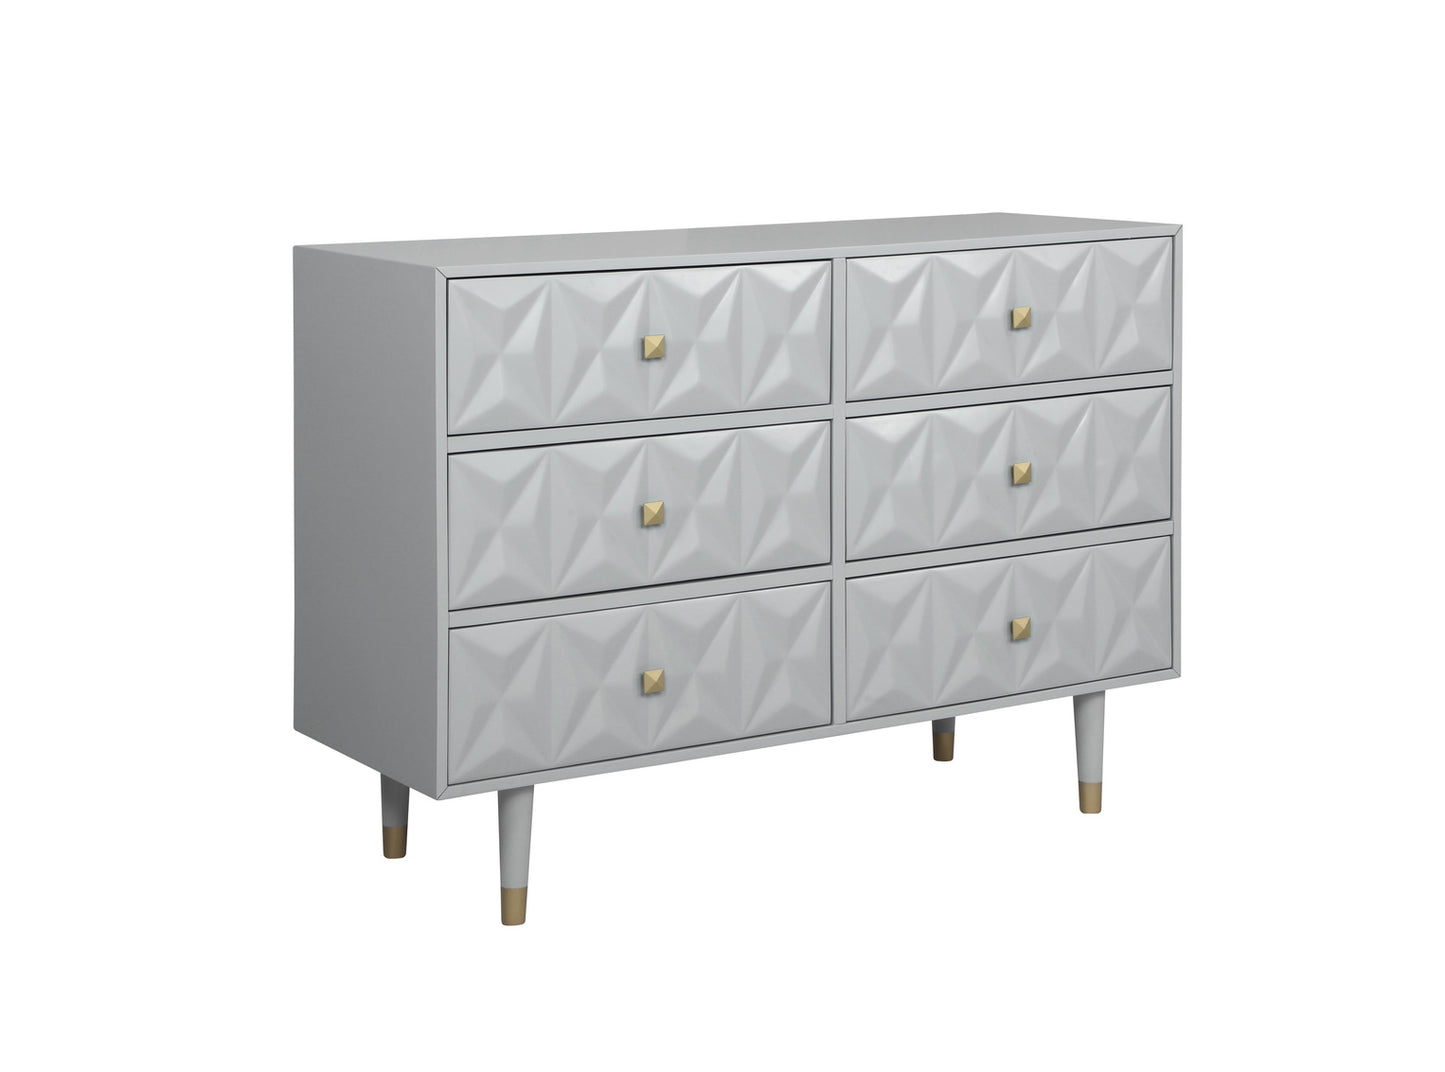 WEEKLY or MONTHLY. Geo Grey Tallboy Chest